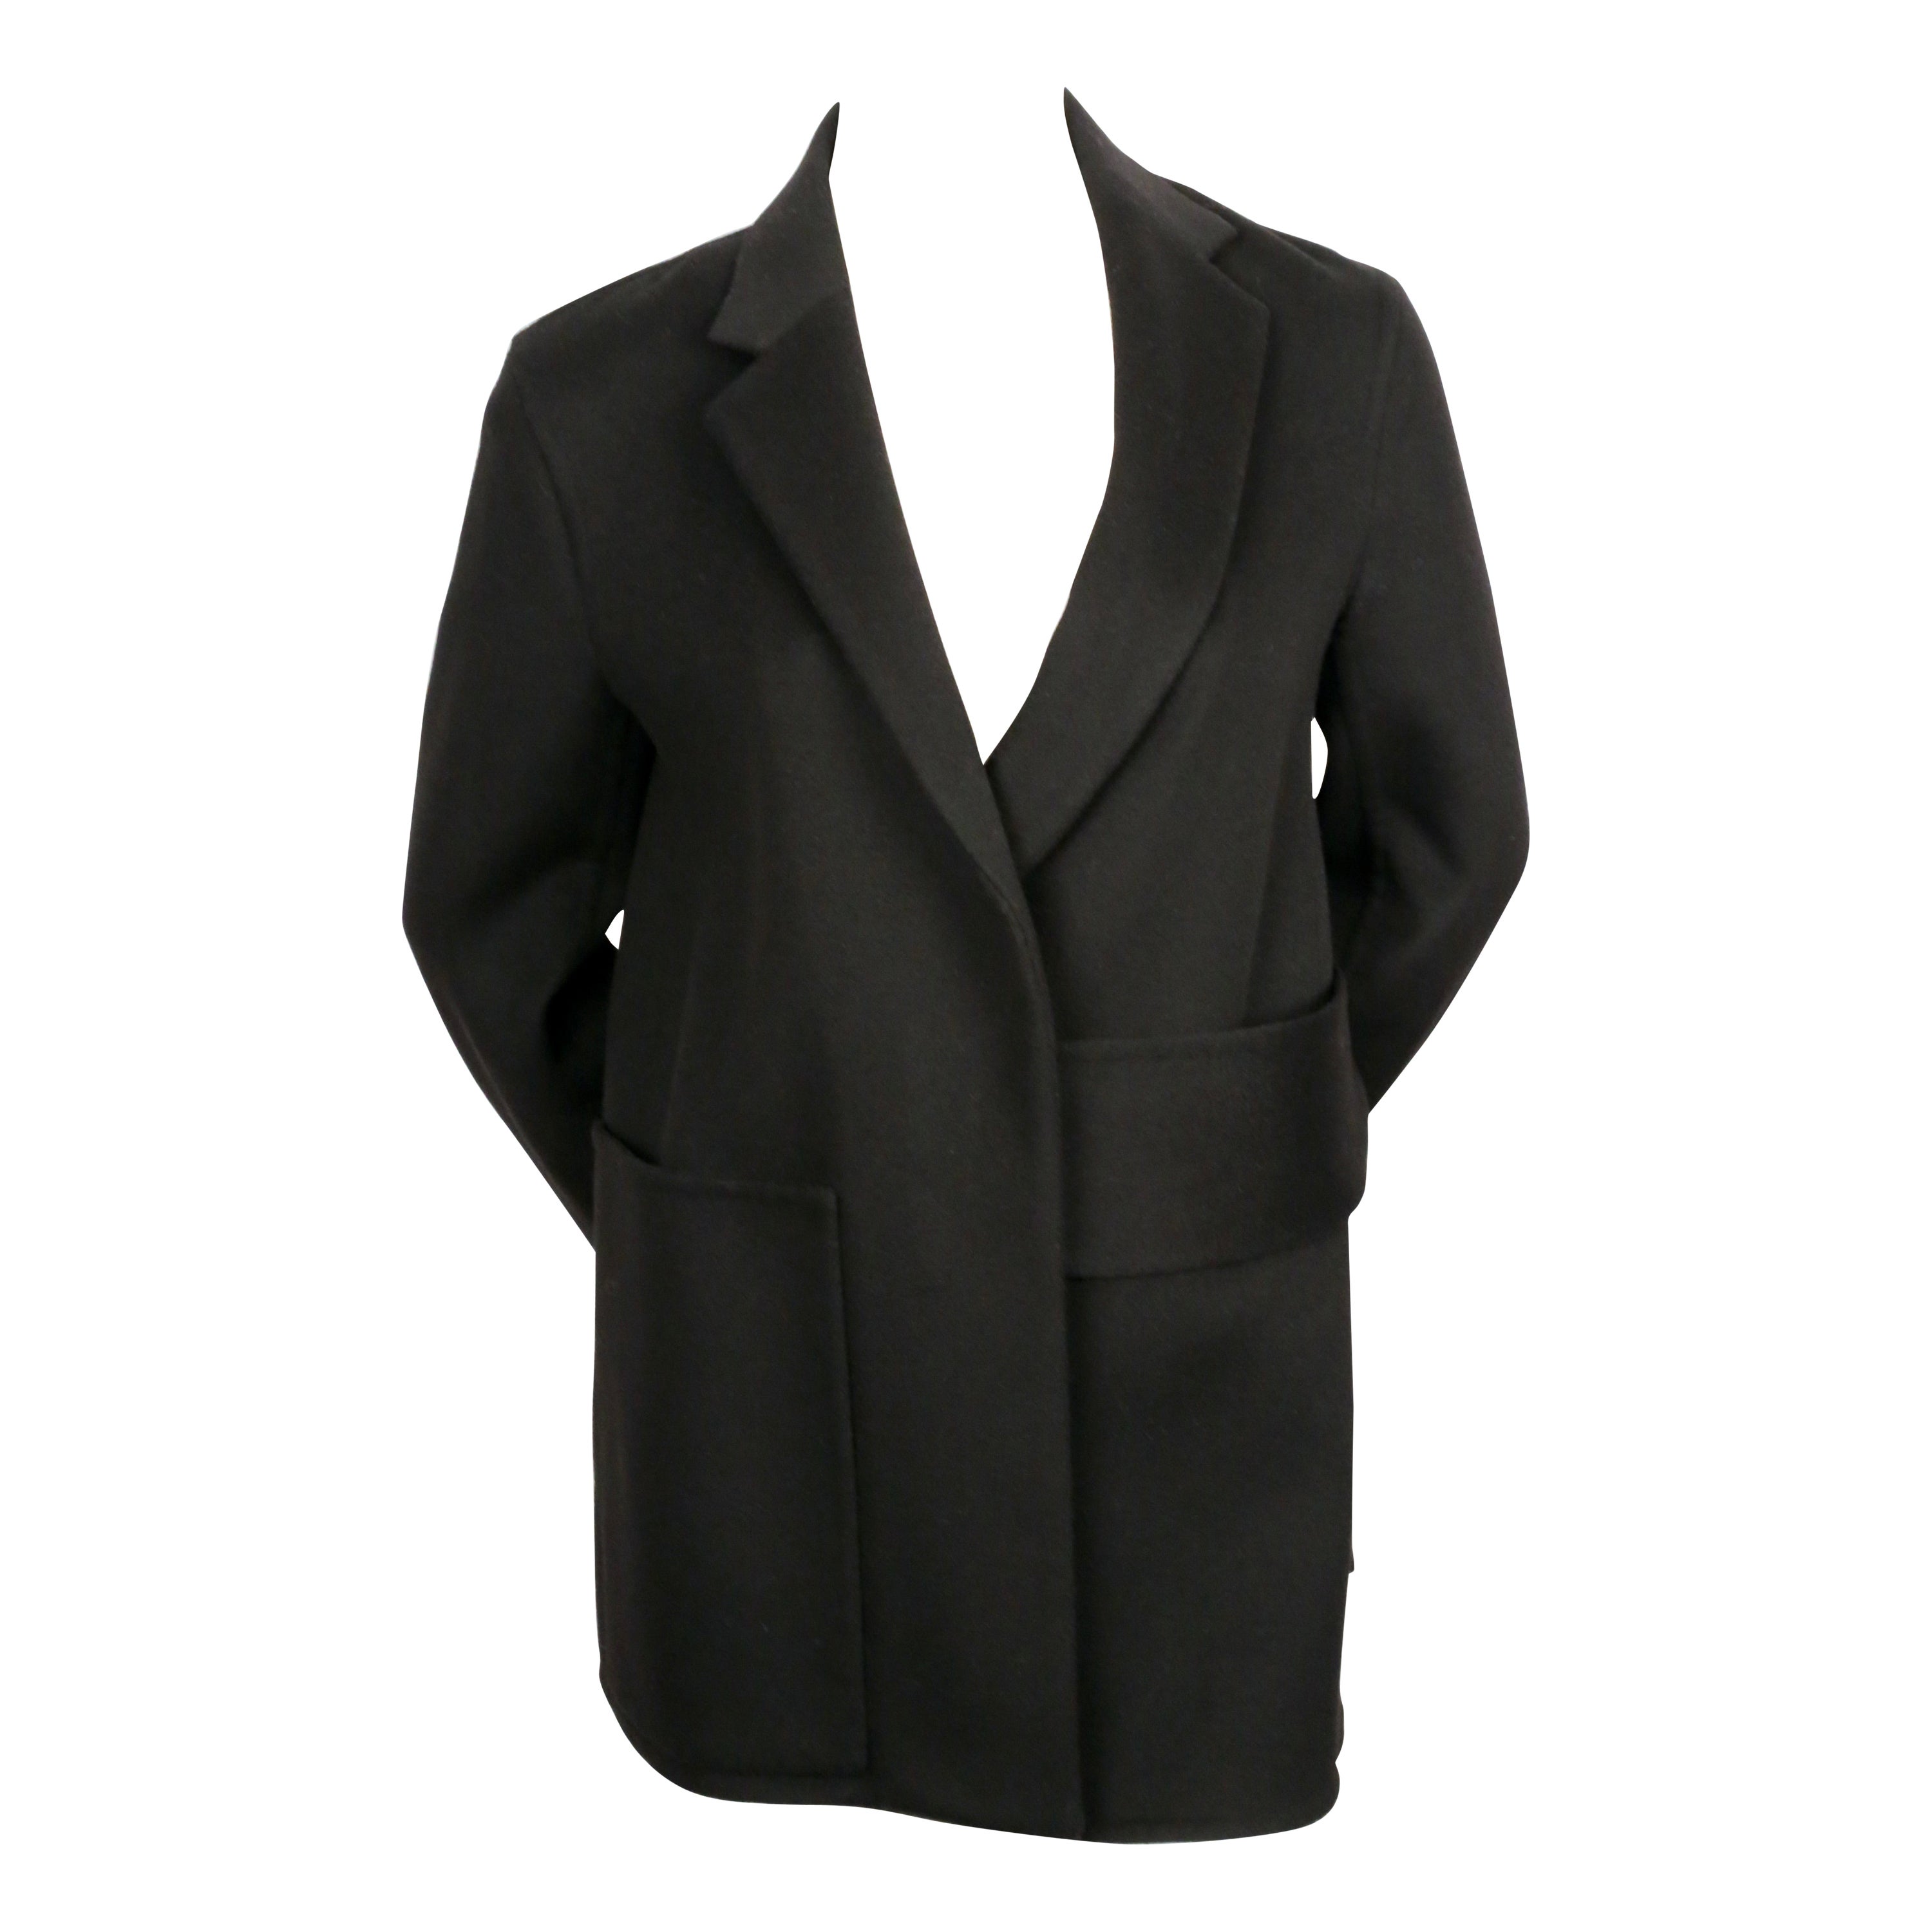 CELINE by PHOEBE PHILO black wool and cashmere jacket with asymmetrical belt For Sale